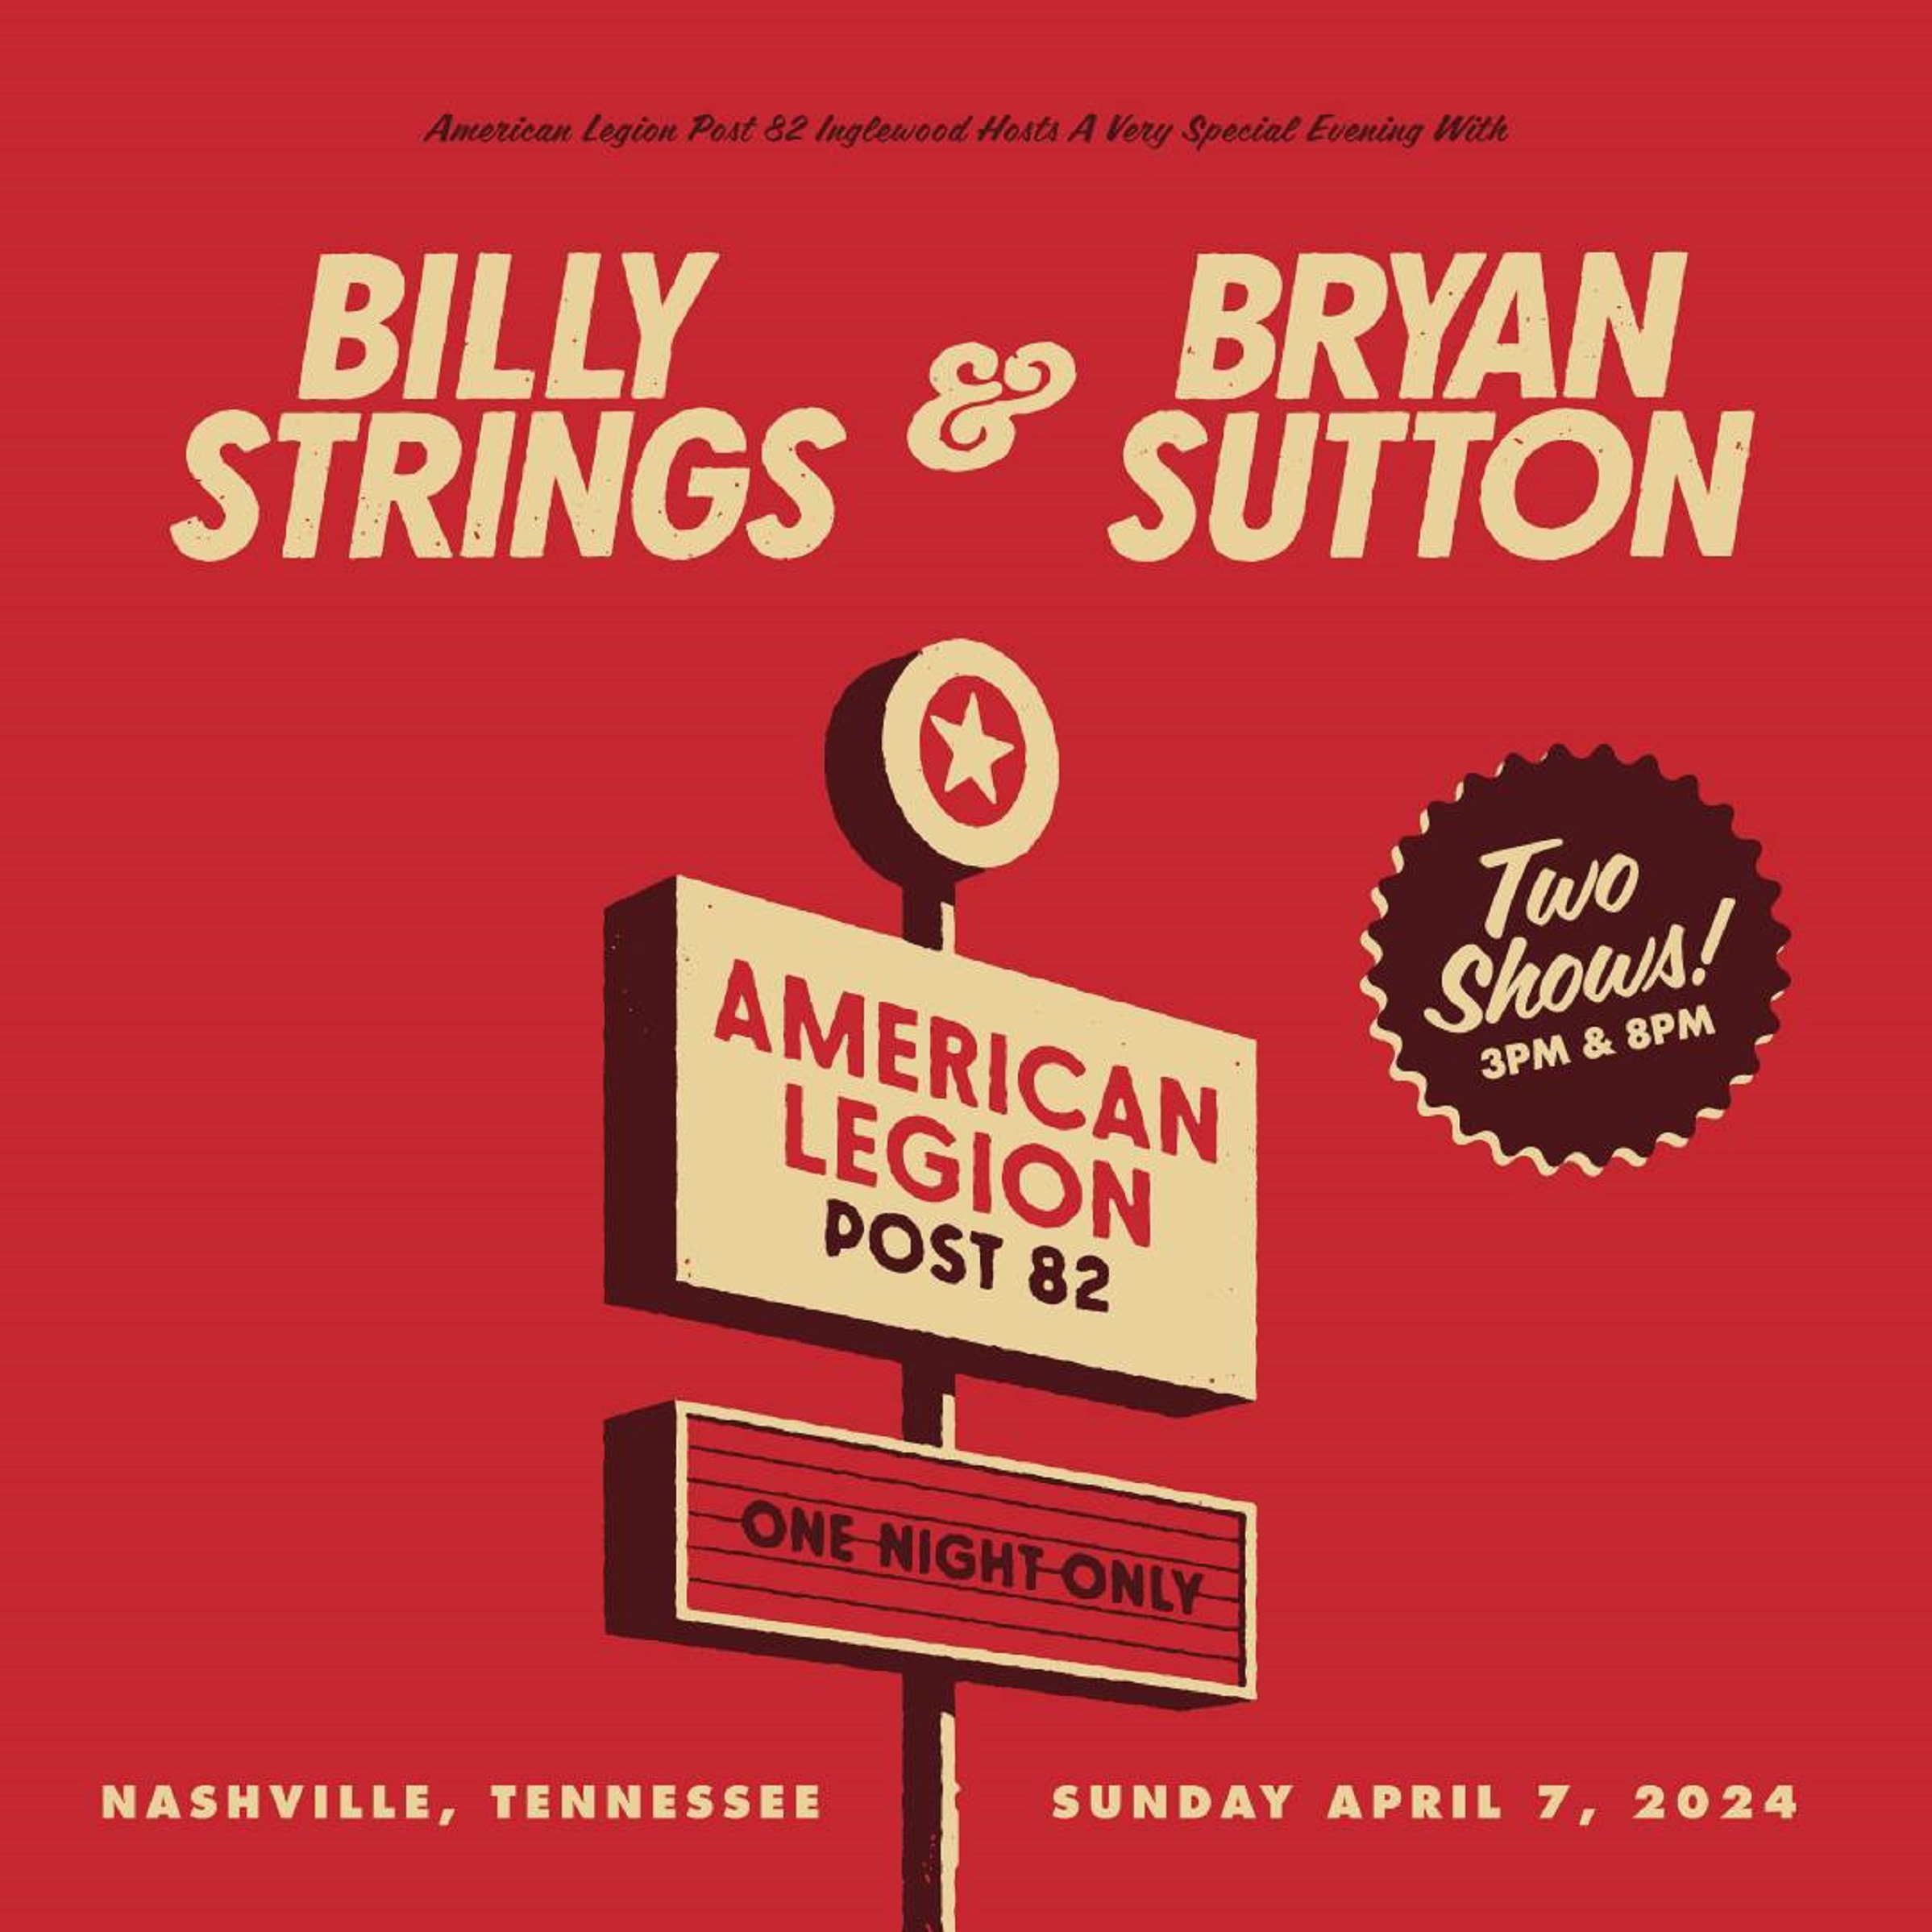 Bryan Sutton and Billy Strings Reunite for an Exclusive One-Night Performance in Nashville, TN